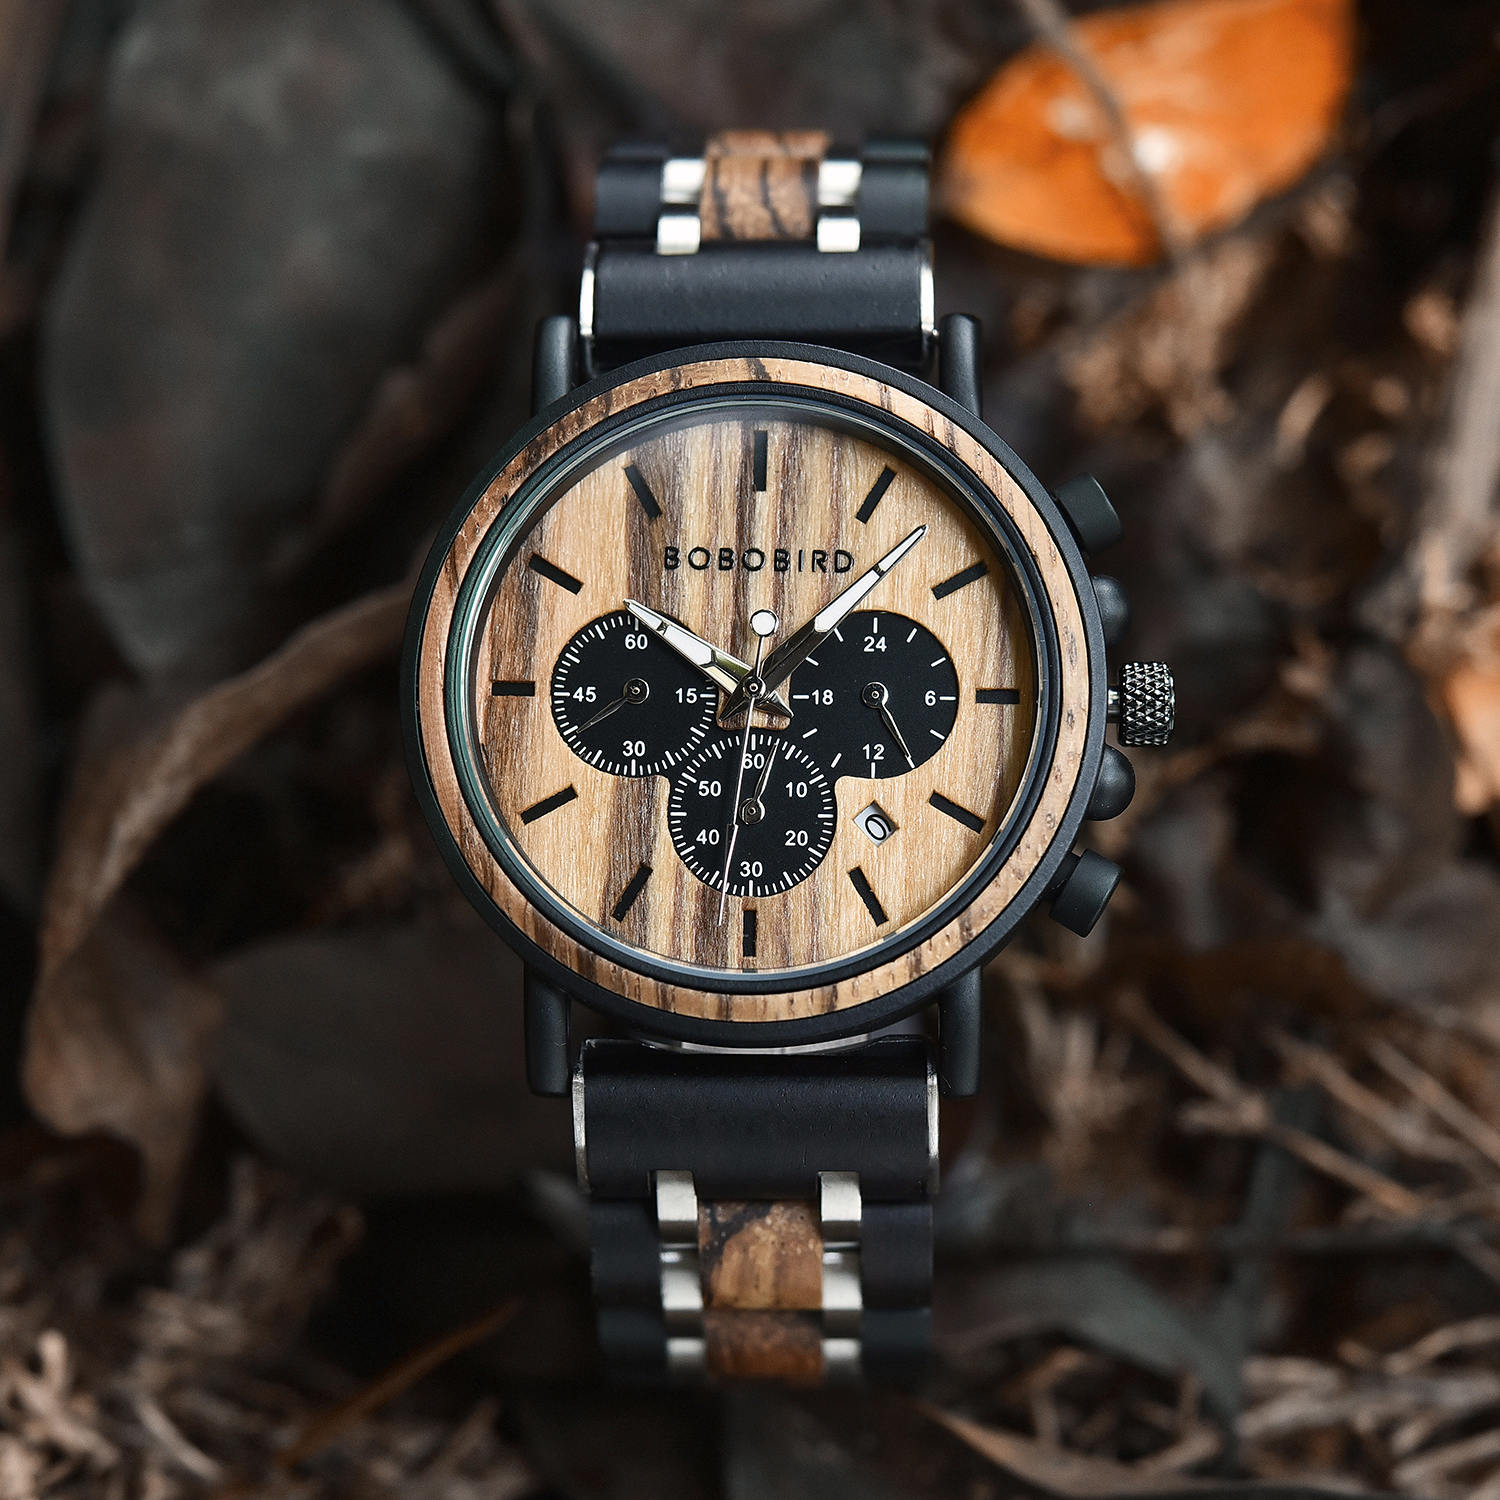 BOBO BIRD Mens Wooden Watches Business Casual Wristwatches Stylish Ebony Wood & Stainless Steel Combined Chronograph with Gift Box Grey 